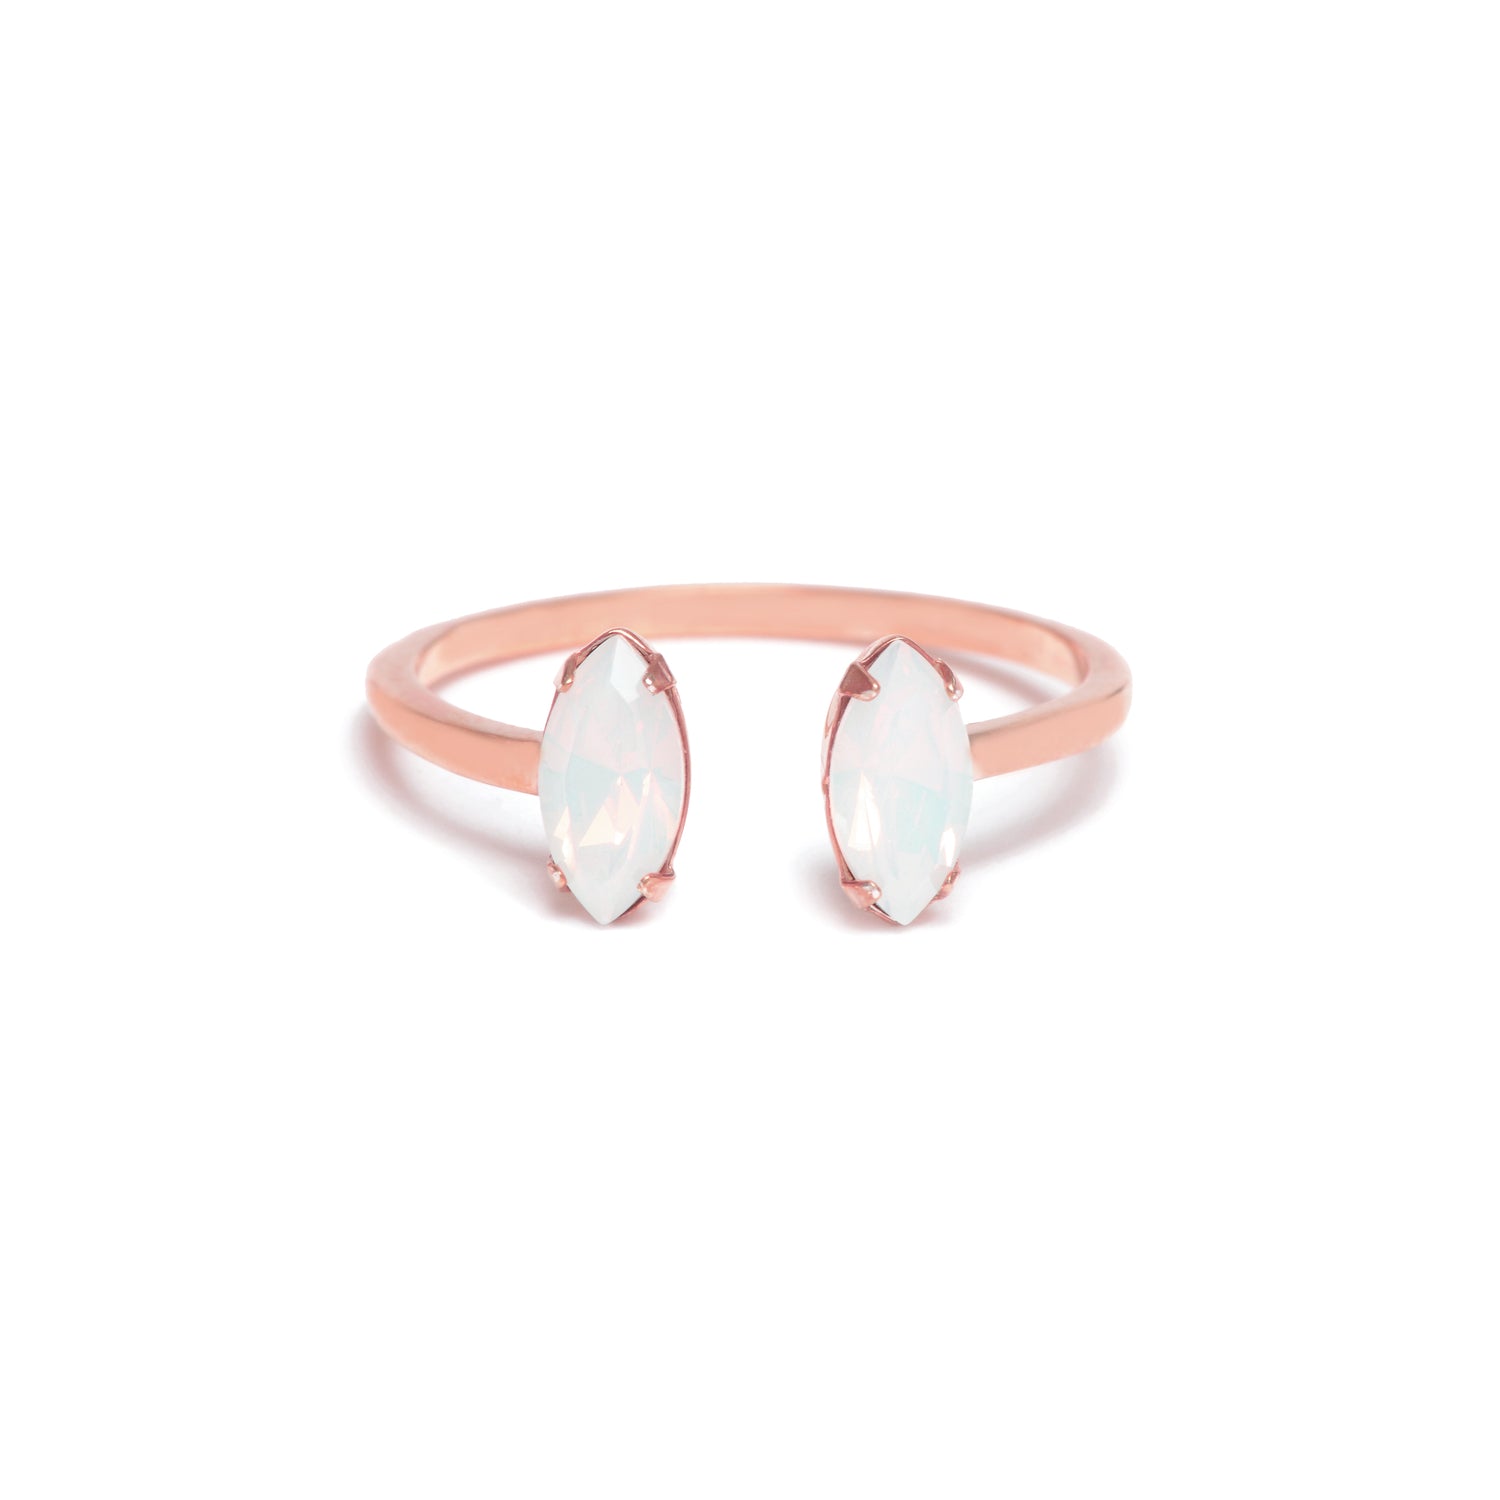 Double Marquis Ring - Rose Gold - Bing Bang Jewelry NYC